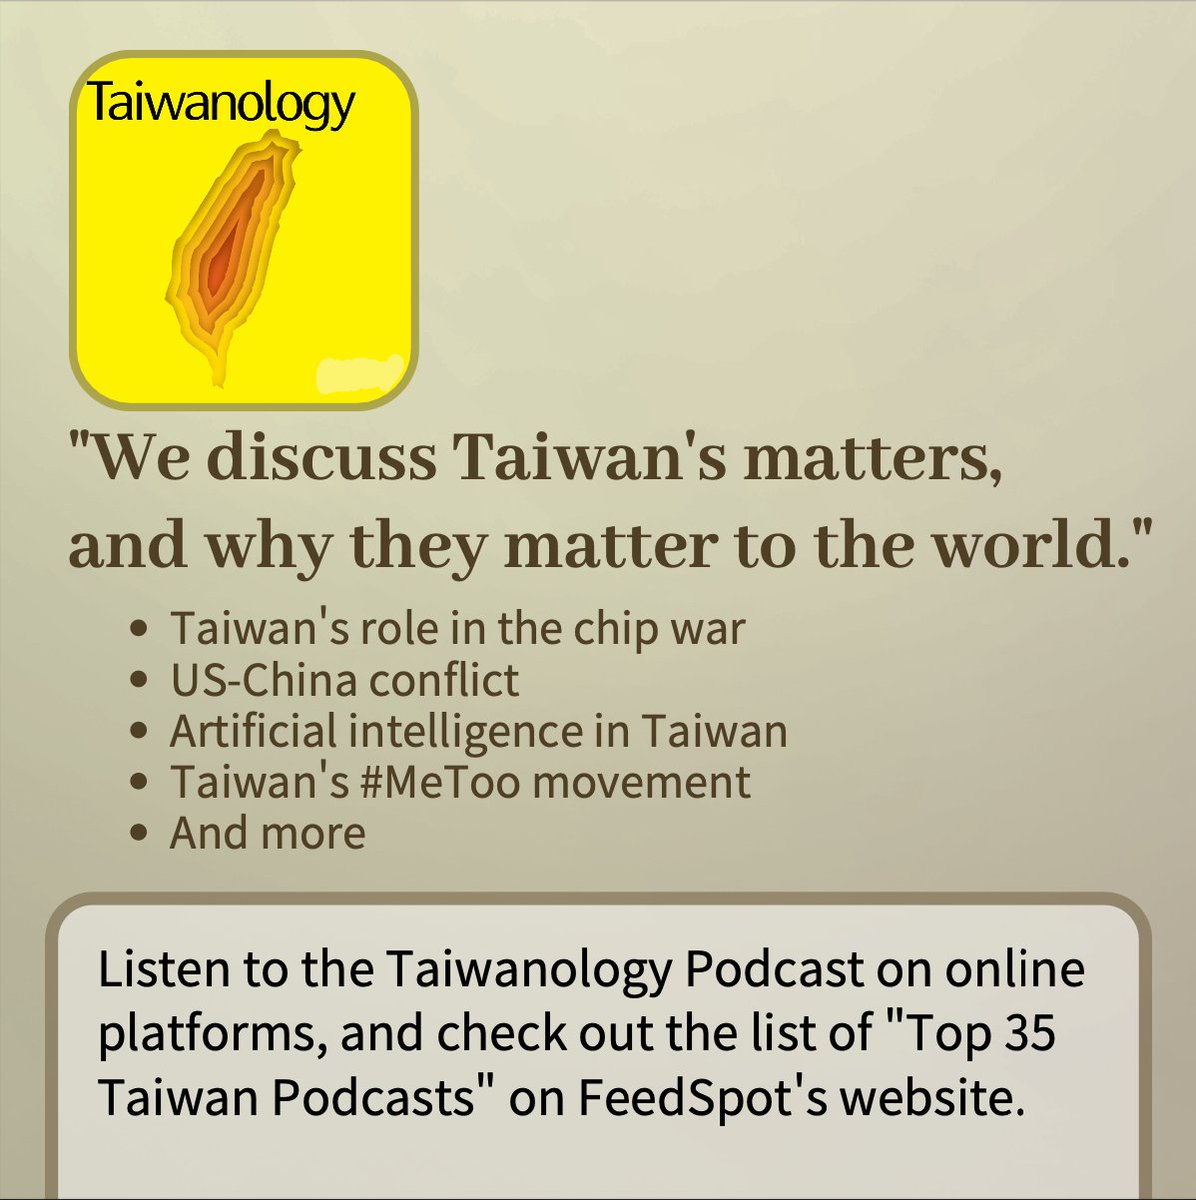 The Top 35 #Taiwan #Podcasts list created by @_feedspot is “the most comprehensive list of Top 35 Taiwan Podcasts on the internet,” selected from thousands of podcasts on the web and ranked by traffic, social media followers, and freshness. We are honored to be part of this.